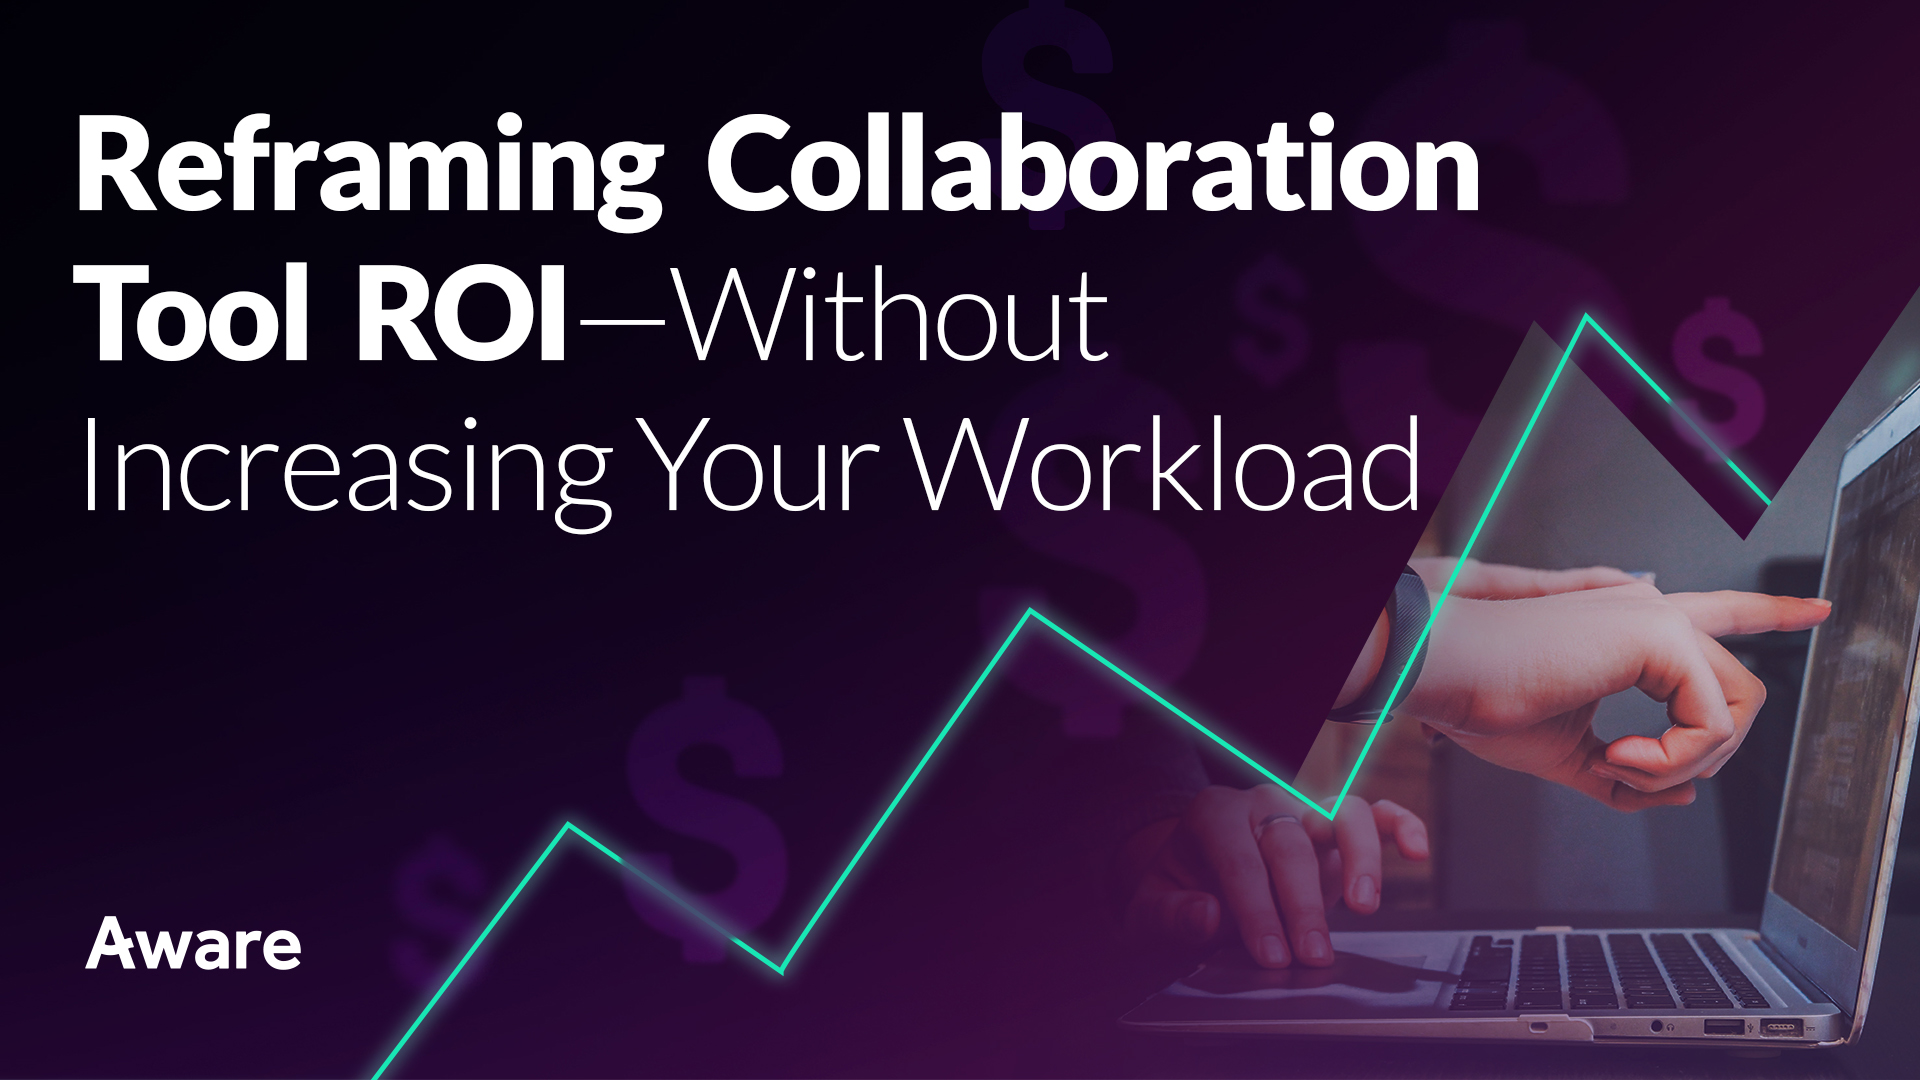 How to Reframe Collaboration Tool ROI — Without Increasing Your Workload